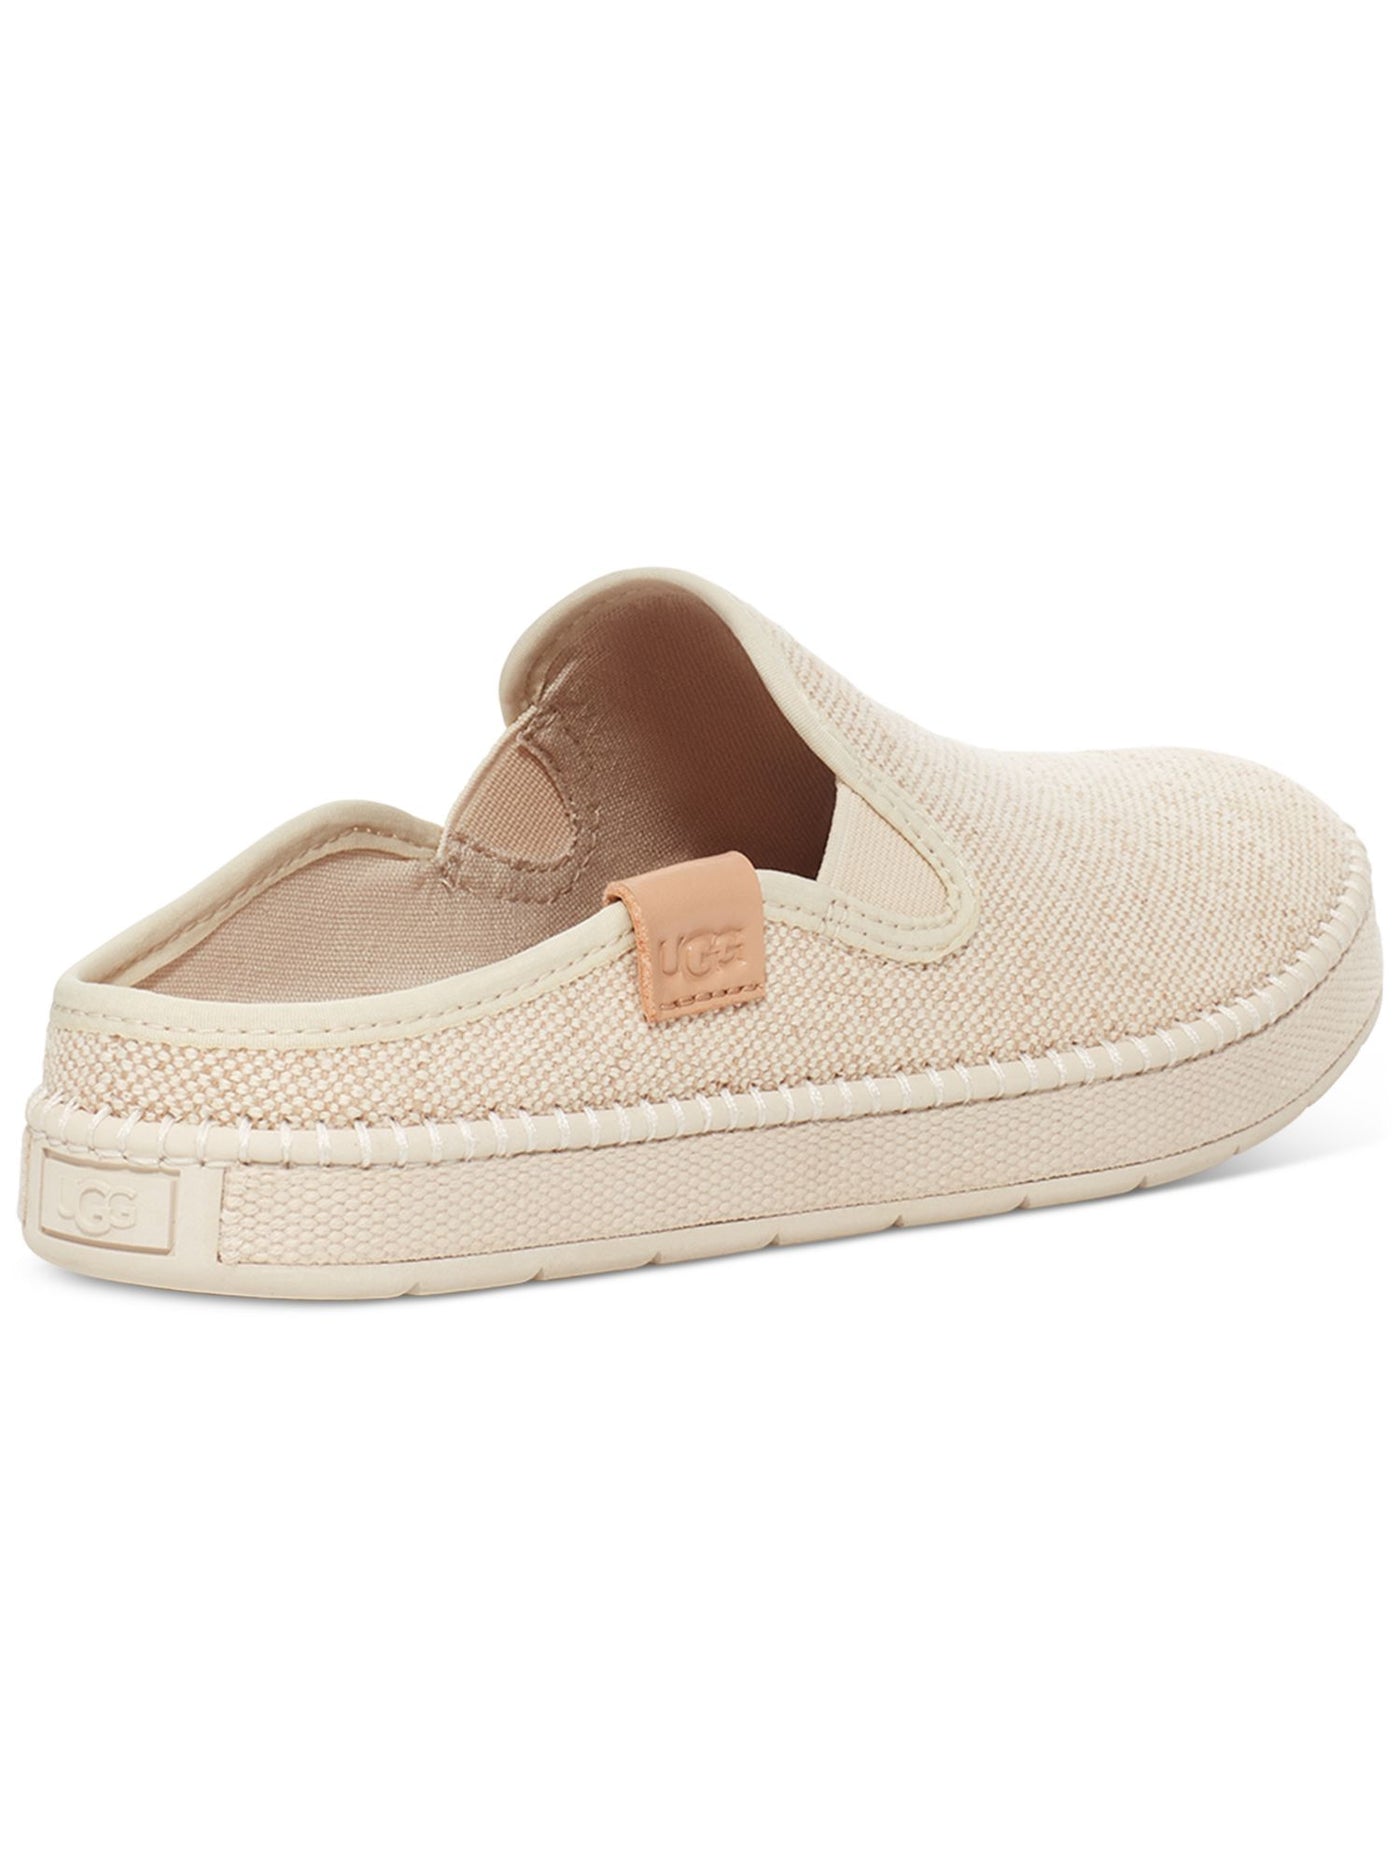 UGG Womens Beige Woven Goring Removable Insole Cushioned Delu Round Toe Platform Slip On Mules 8